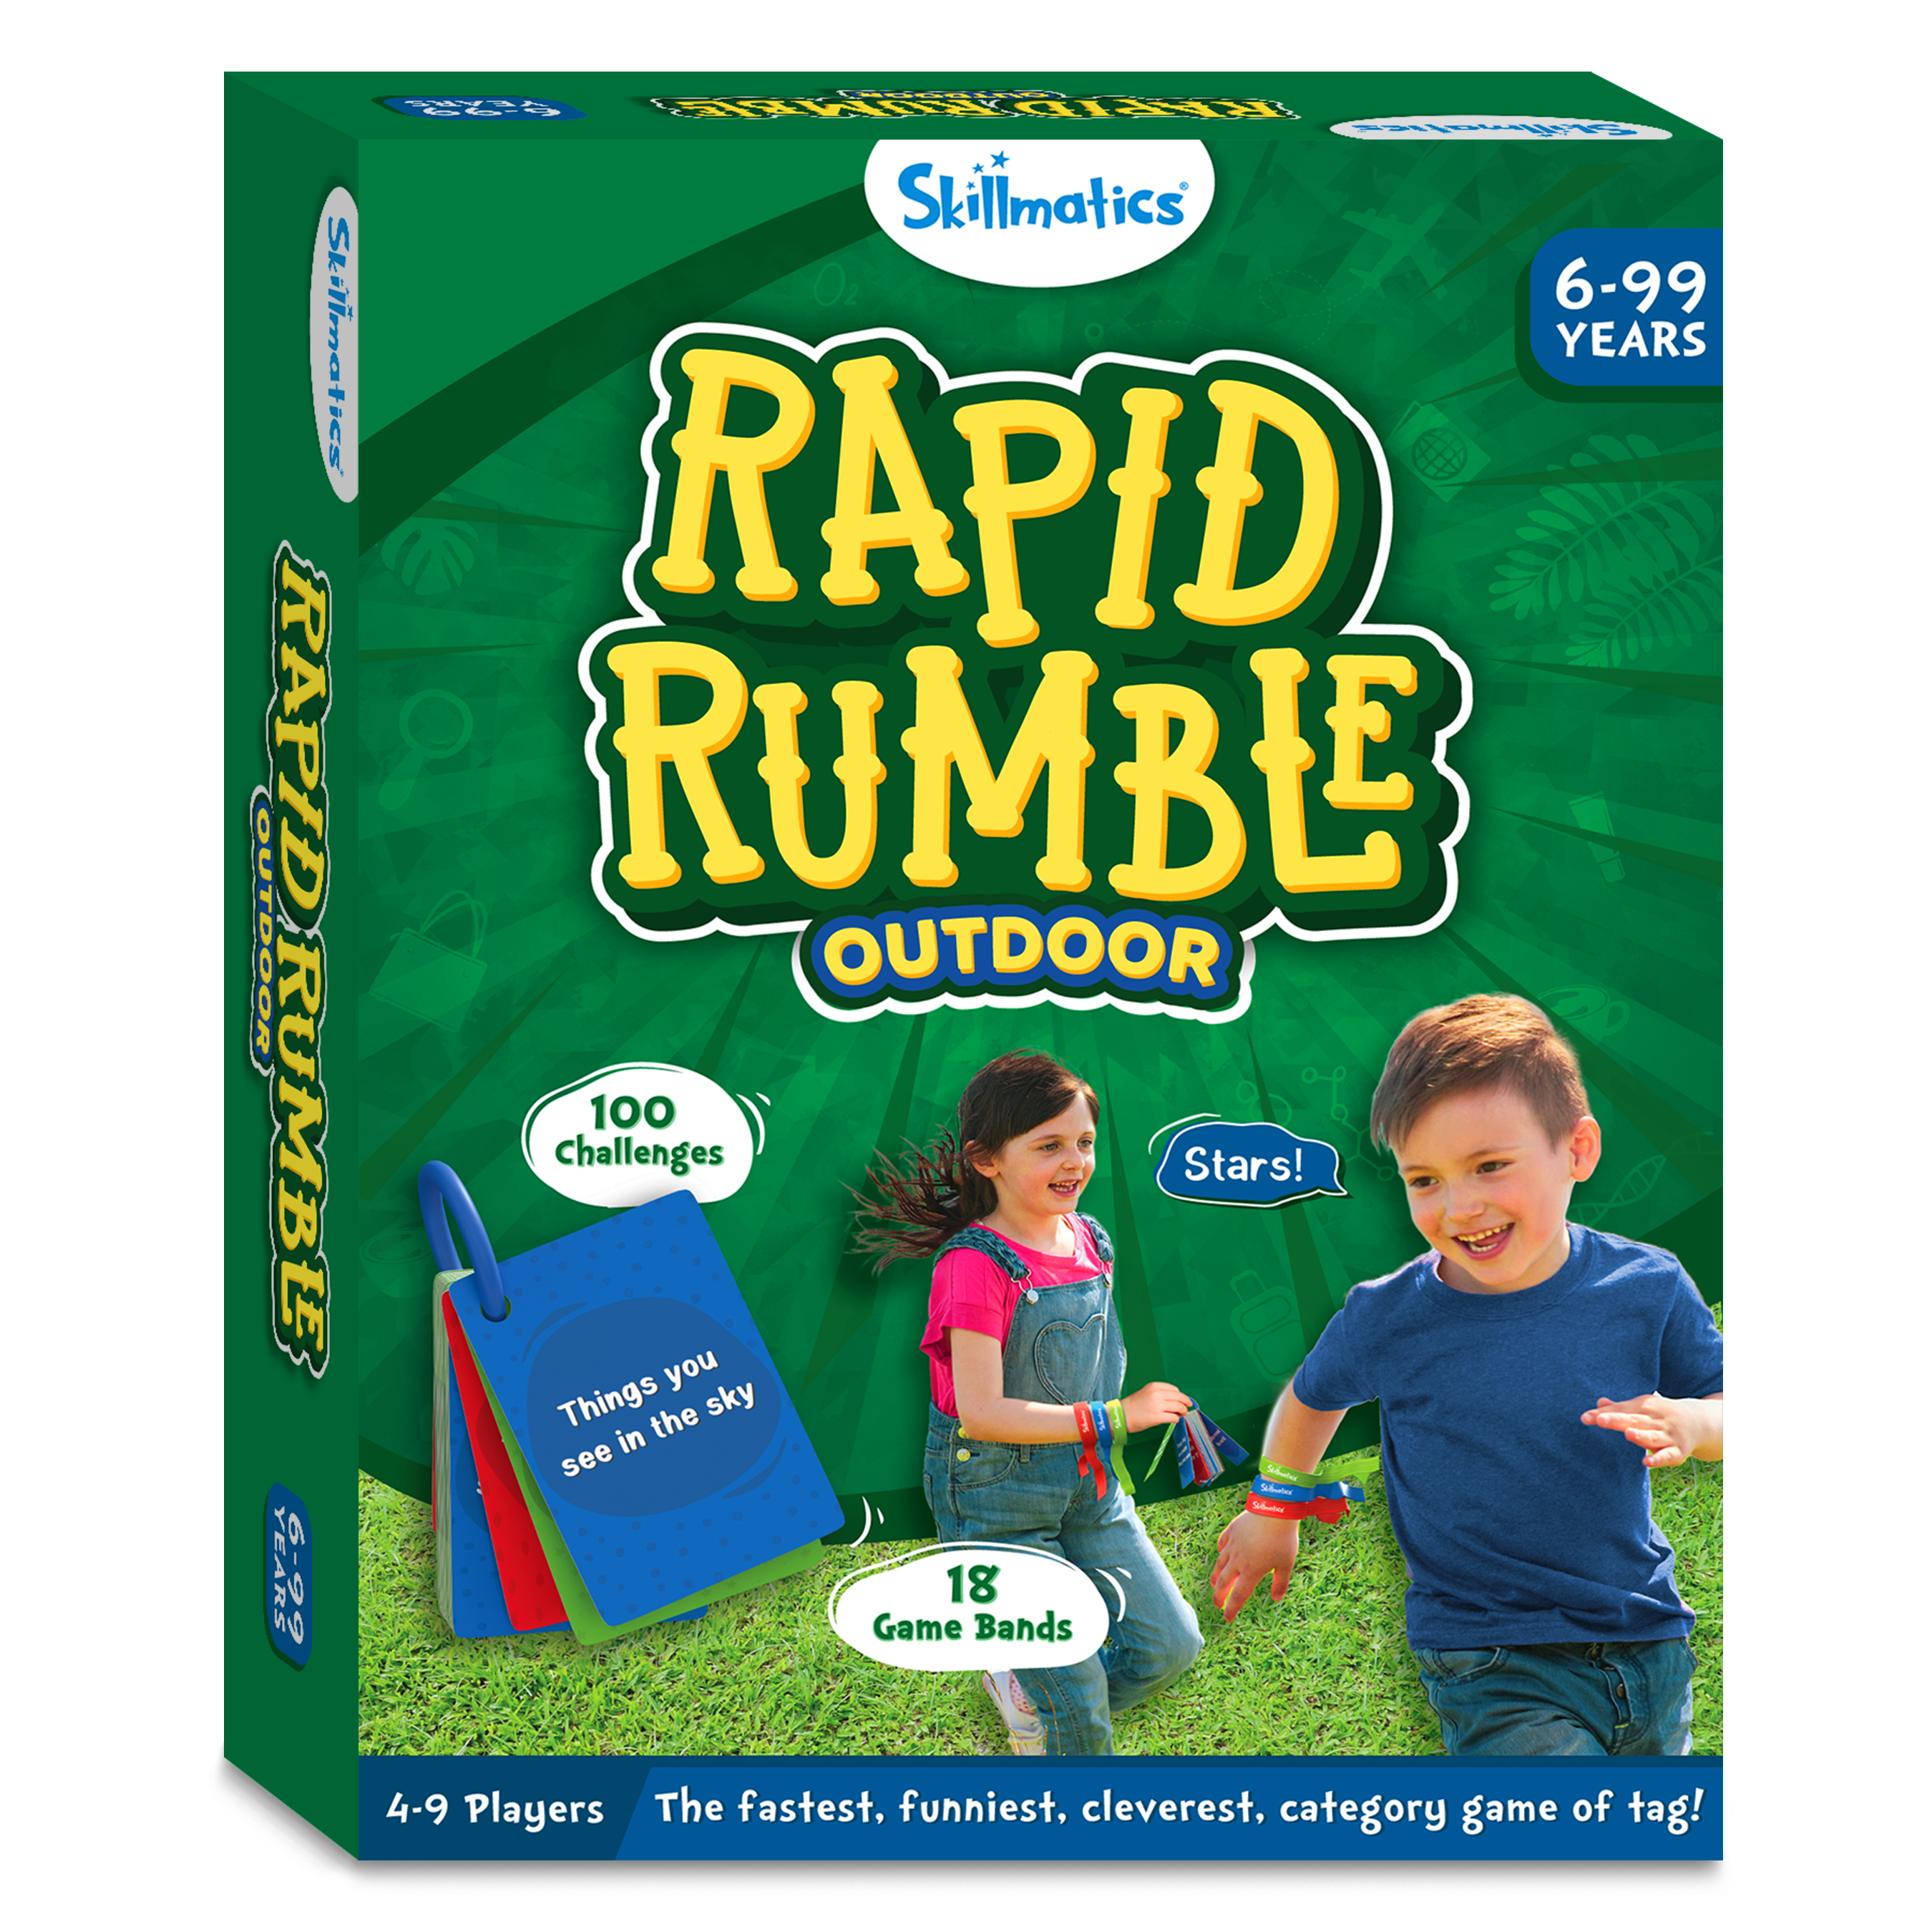 Skillmatics Rapid Rumble Outdoor Edition, Educational & Clever Category Game Of Catch, Games For Kids, Teens & Adults